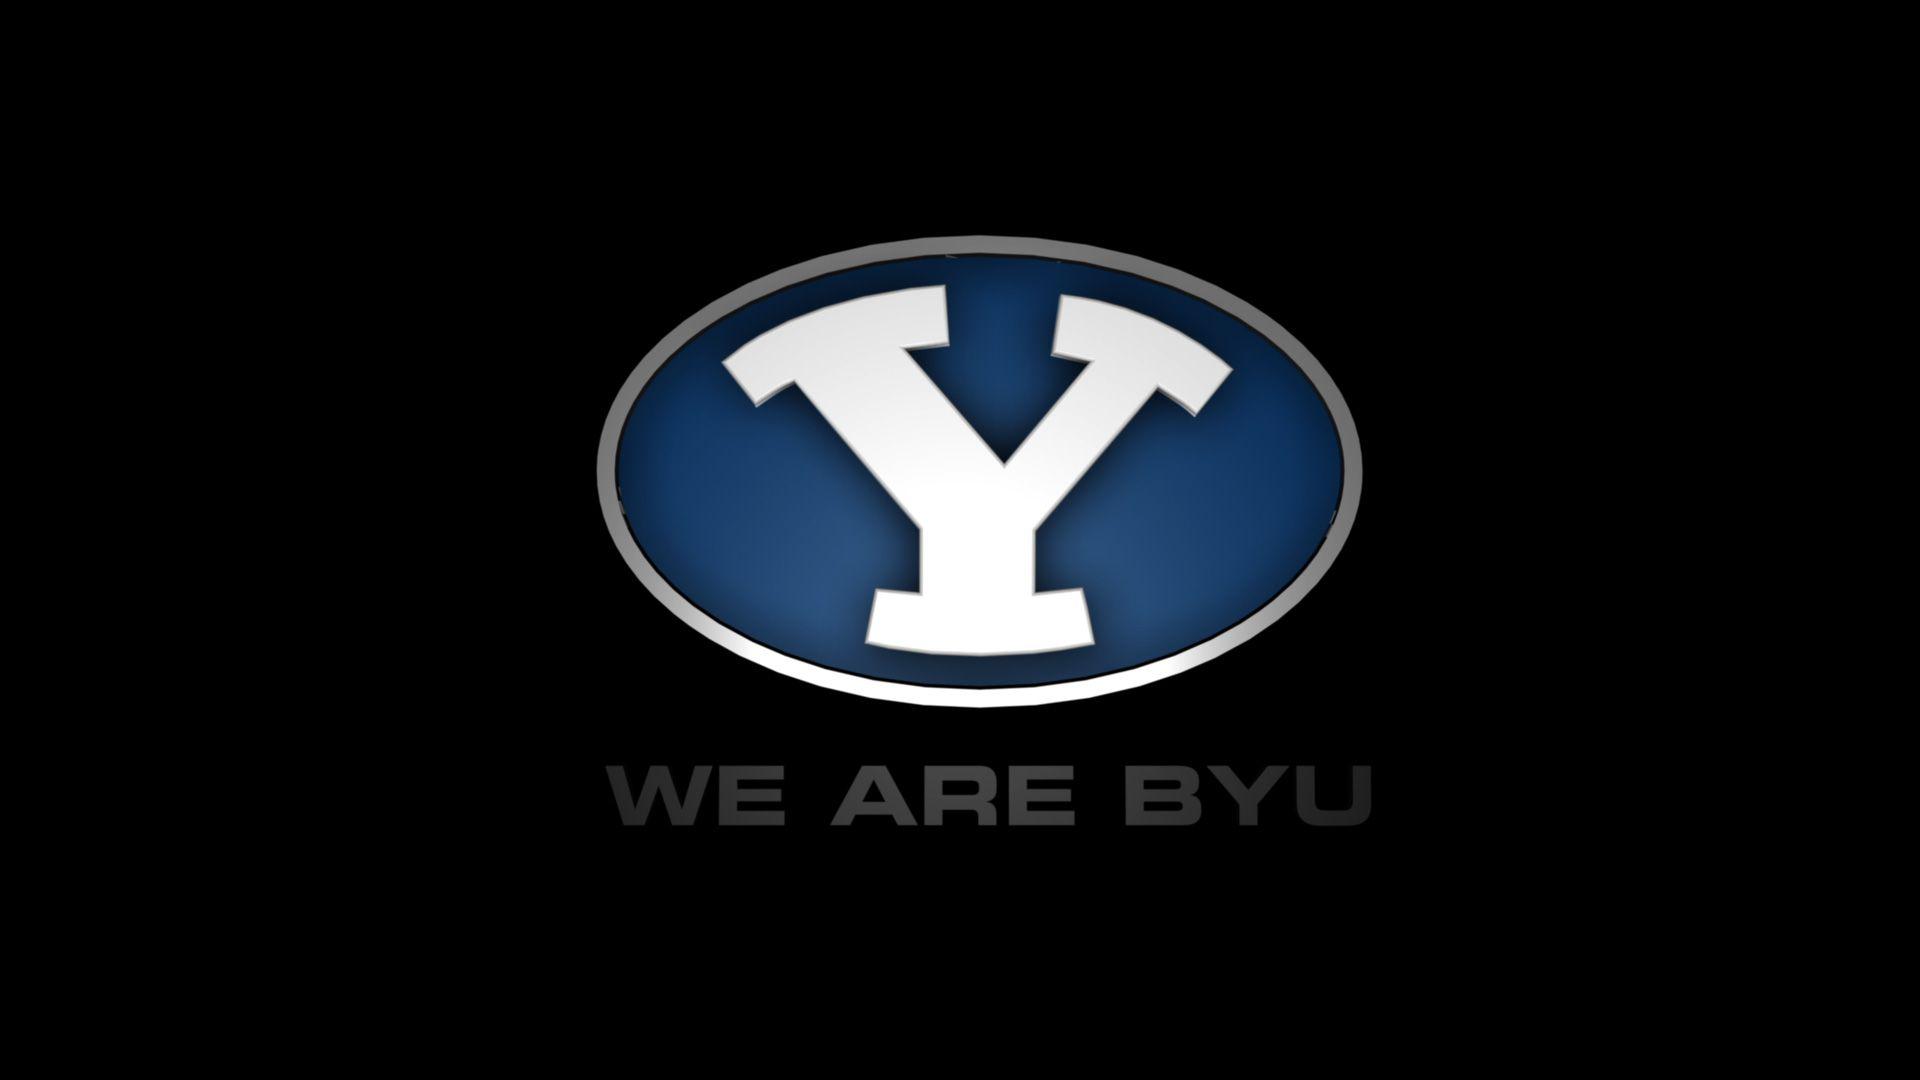 Byu Backgrounds - Wallpaper Cave